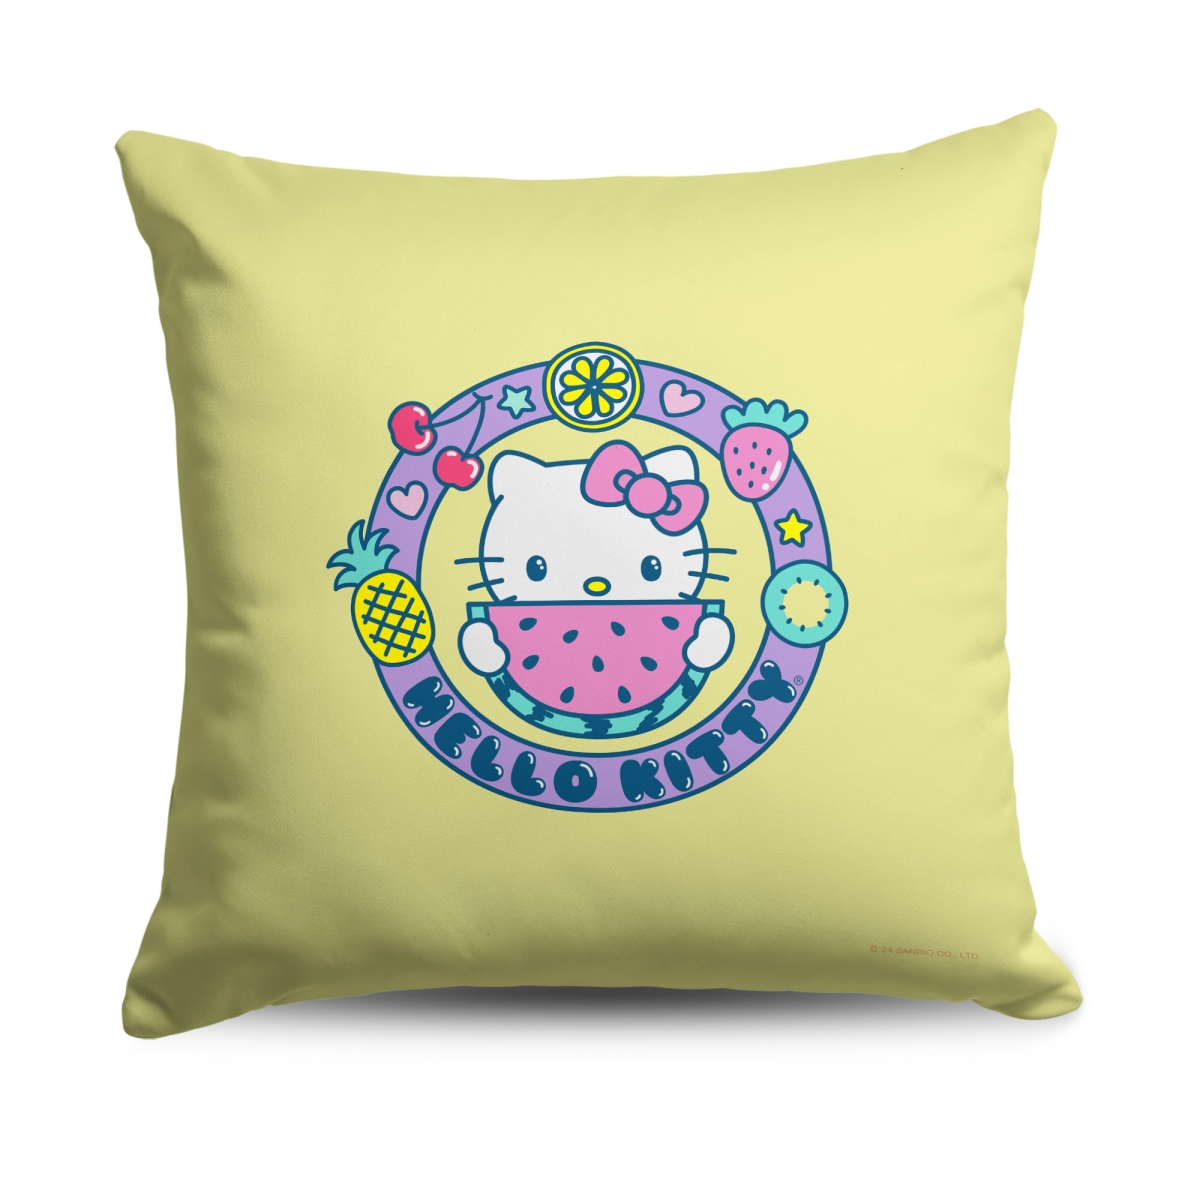 Picture of The Northwest Group 1SAN-69500-0038-RET 18 x 18 in. Sanrio Hello Kitty Vacation Days Printed Throw Pillow